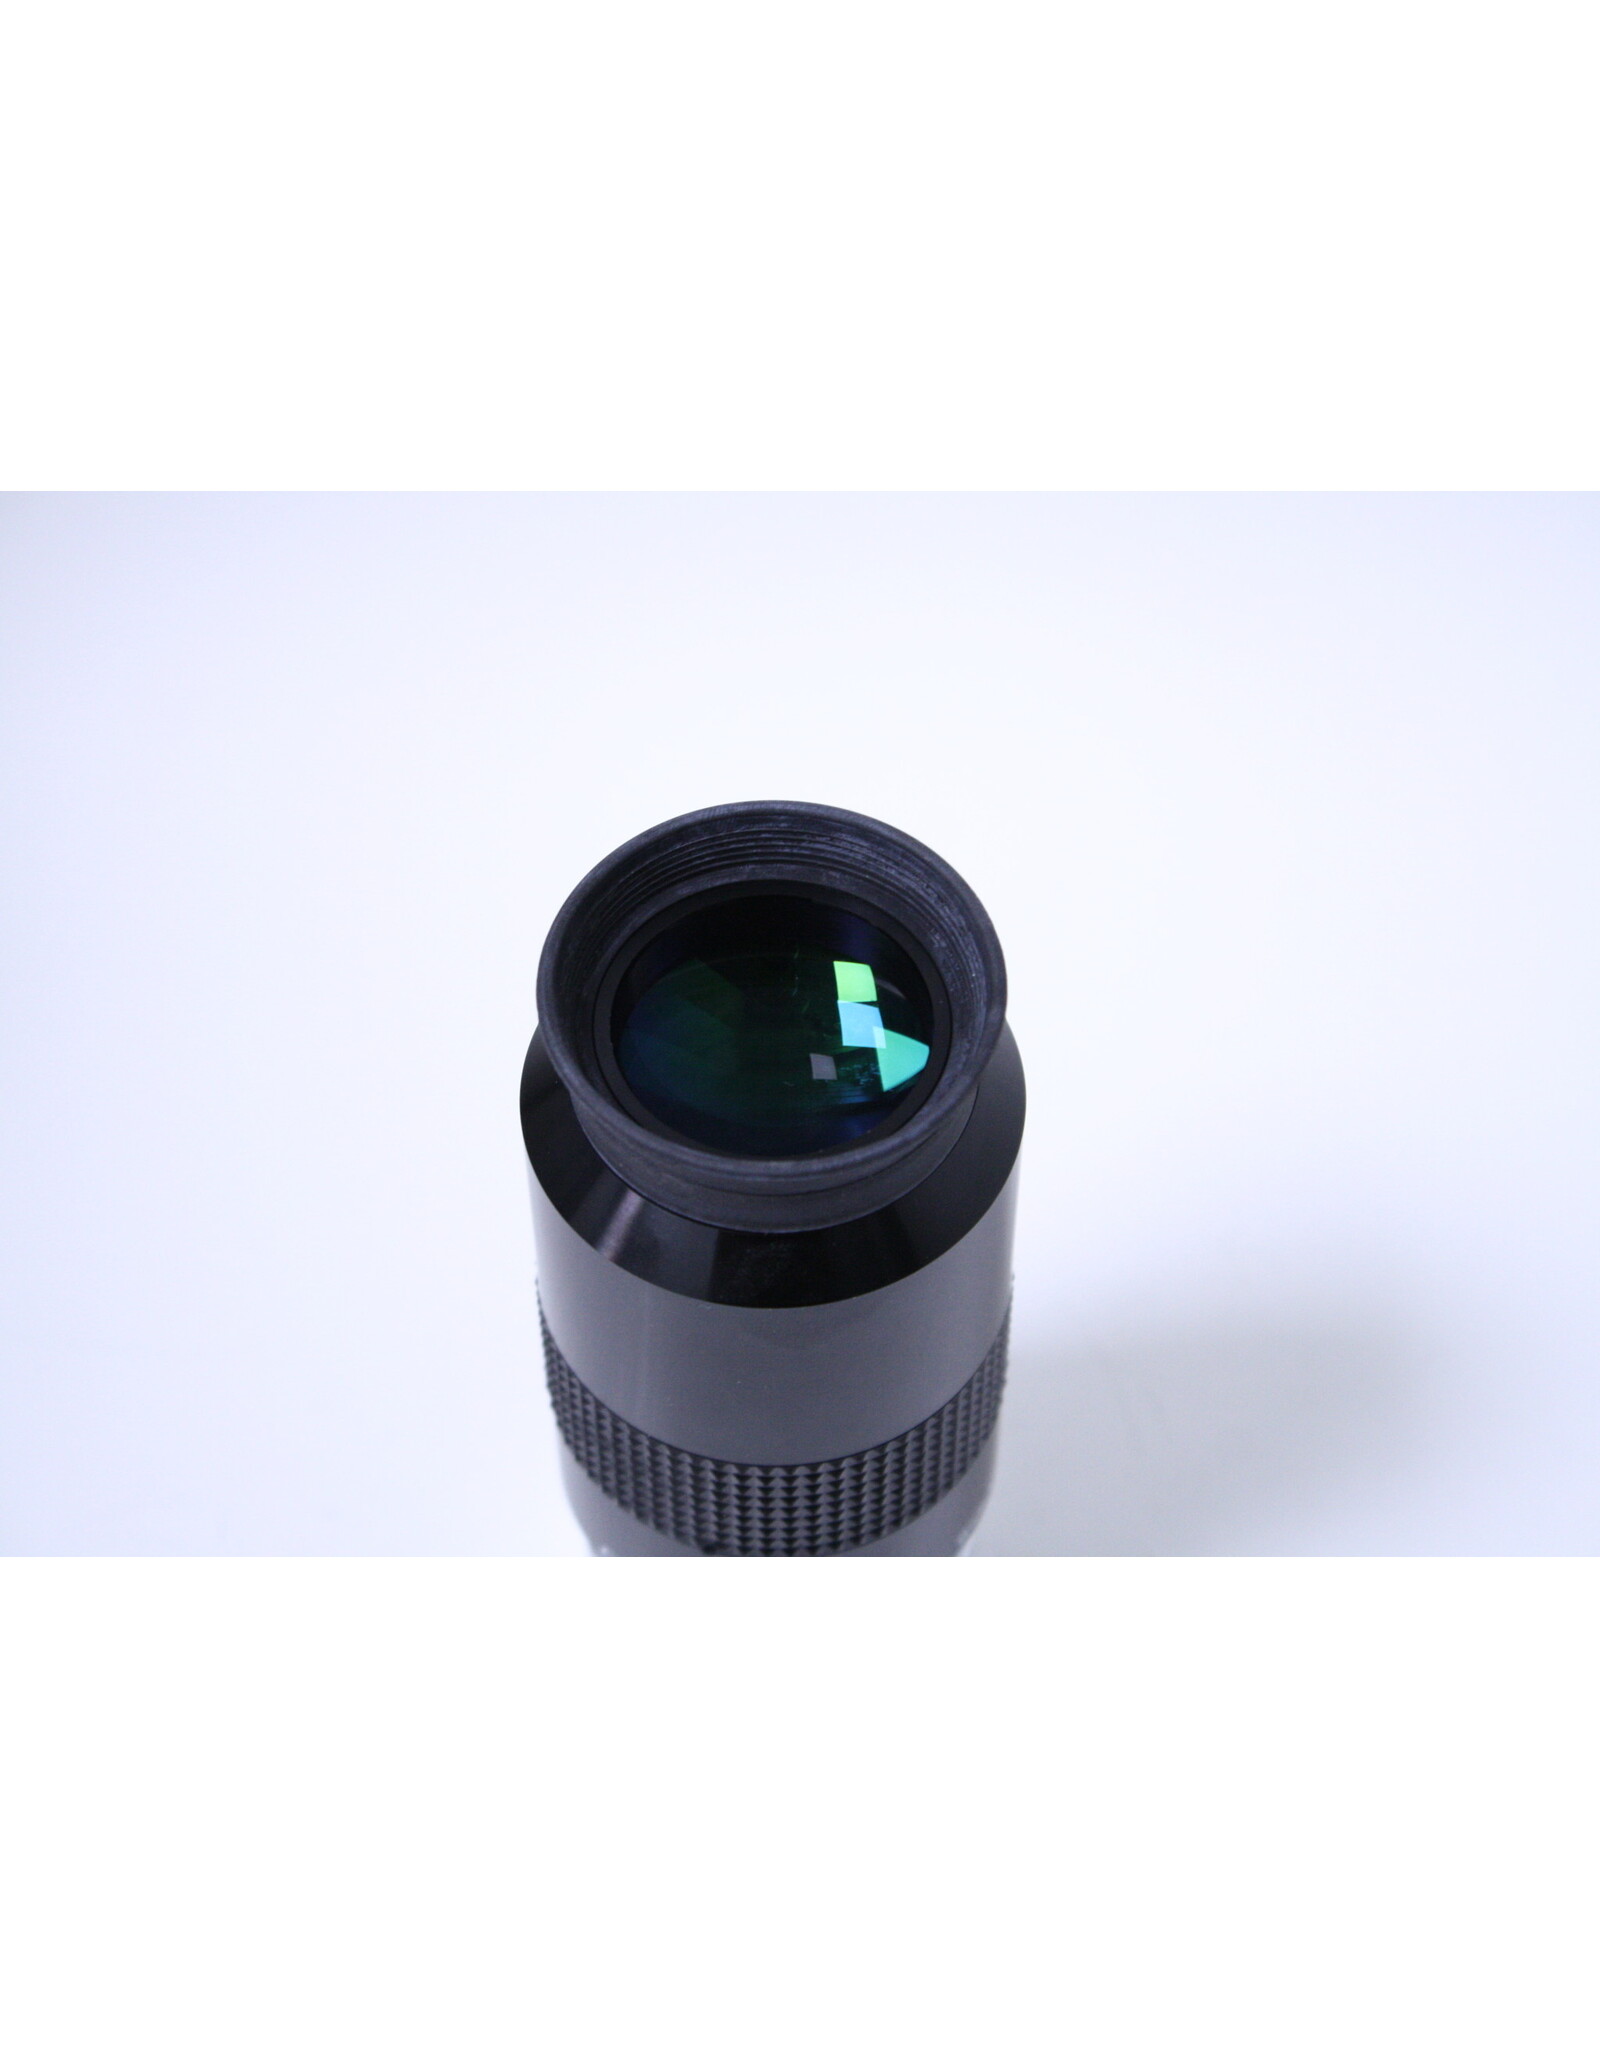 GSO GSO Superview 42mm Wide field (2 inch) Eyepiece (Pre-Owned)